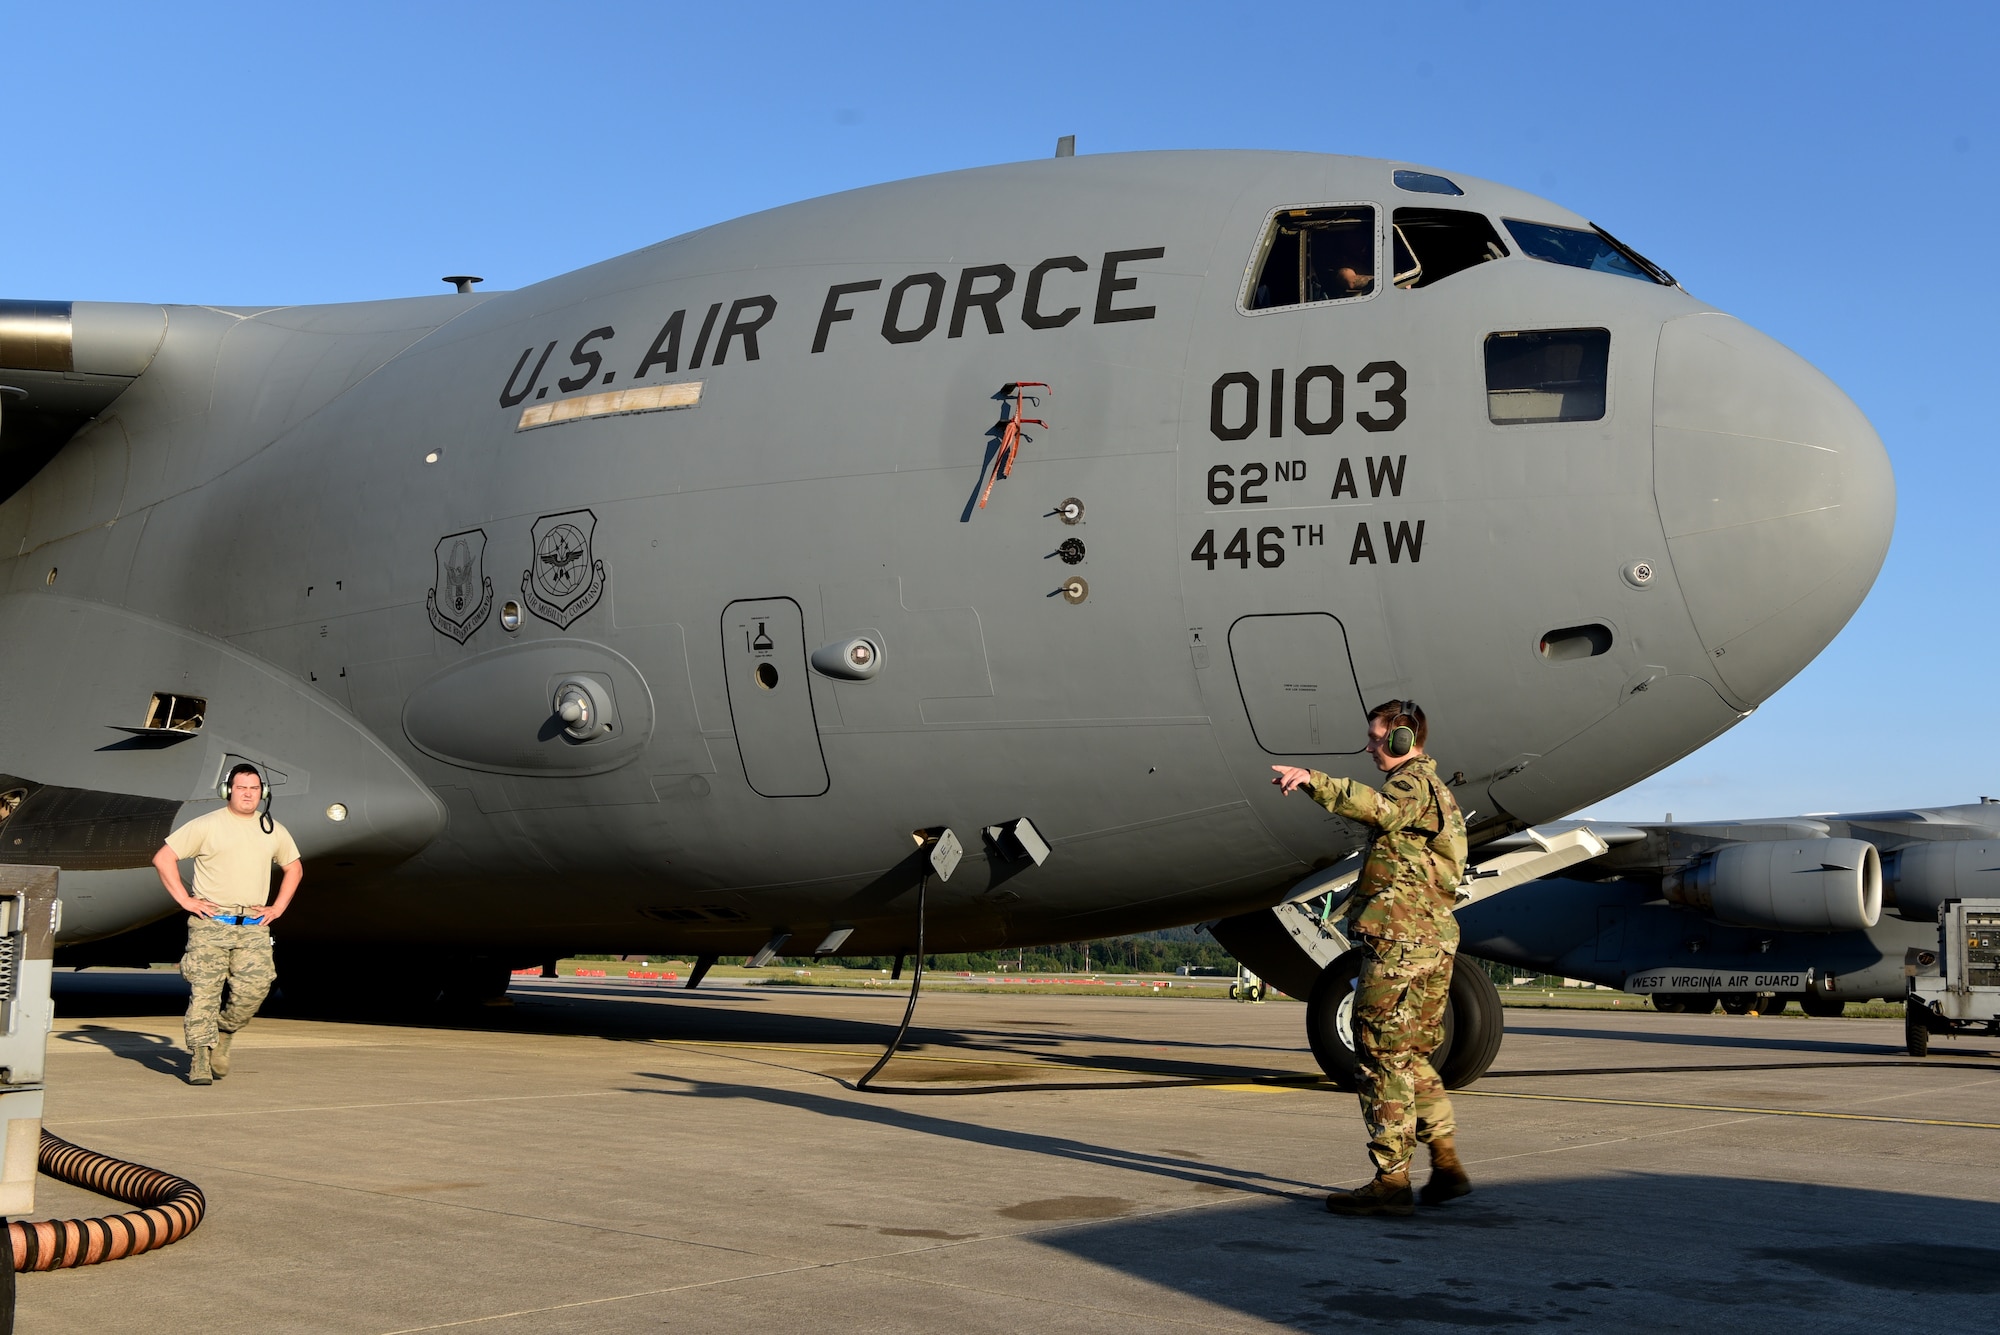 U.S. Air Force Staff Sgt. Taylor J. Eide, right, 721st Aircraft Maintenance Squadron quality assurance inspector, signals to Tech. Sgt. Michael Cain, 721st AMXS flight line expeditor, upon approaching the C-17 Globemaster III aircraft at Ramstein Air Base, Germany, May 21, 2020.